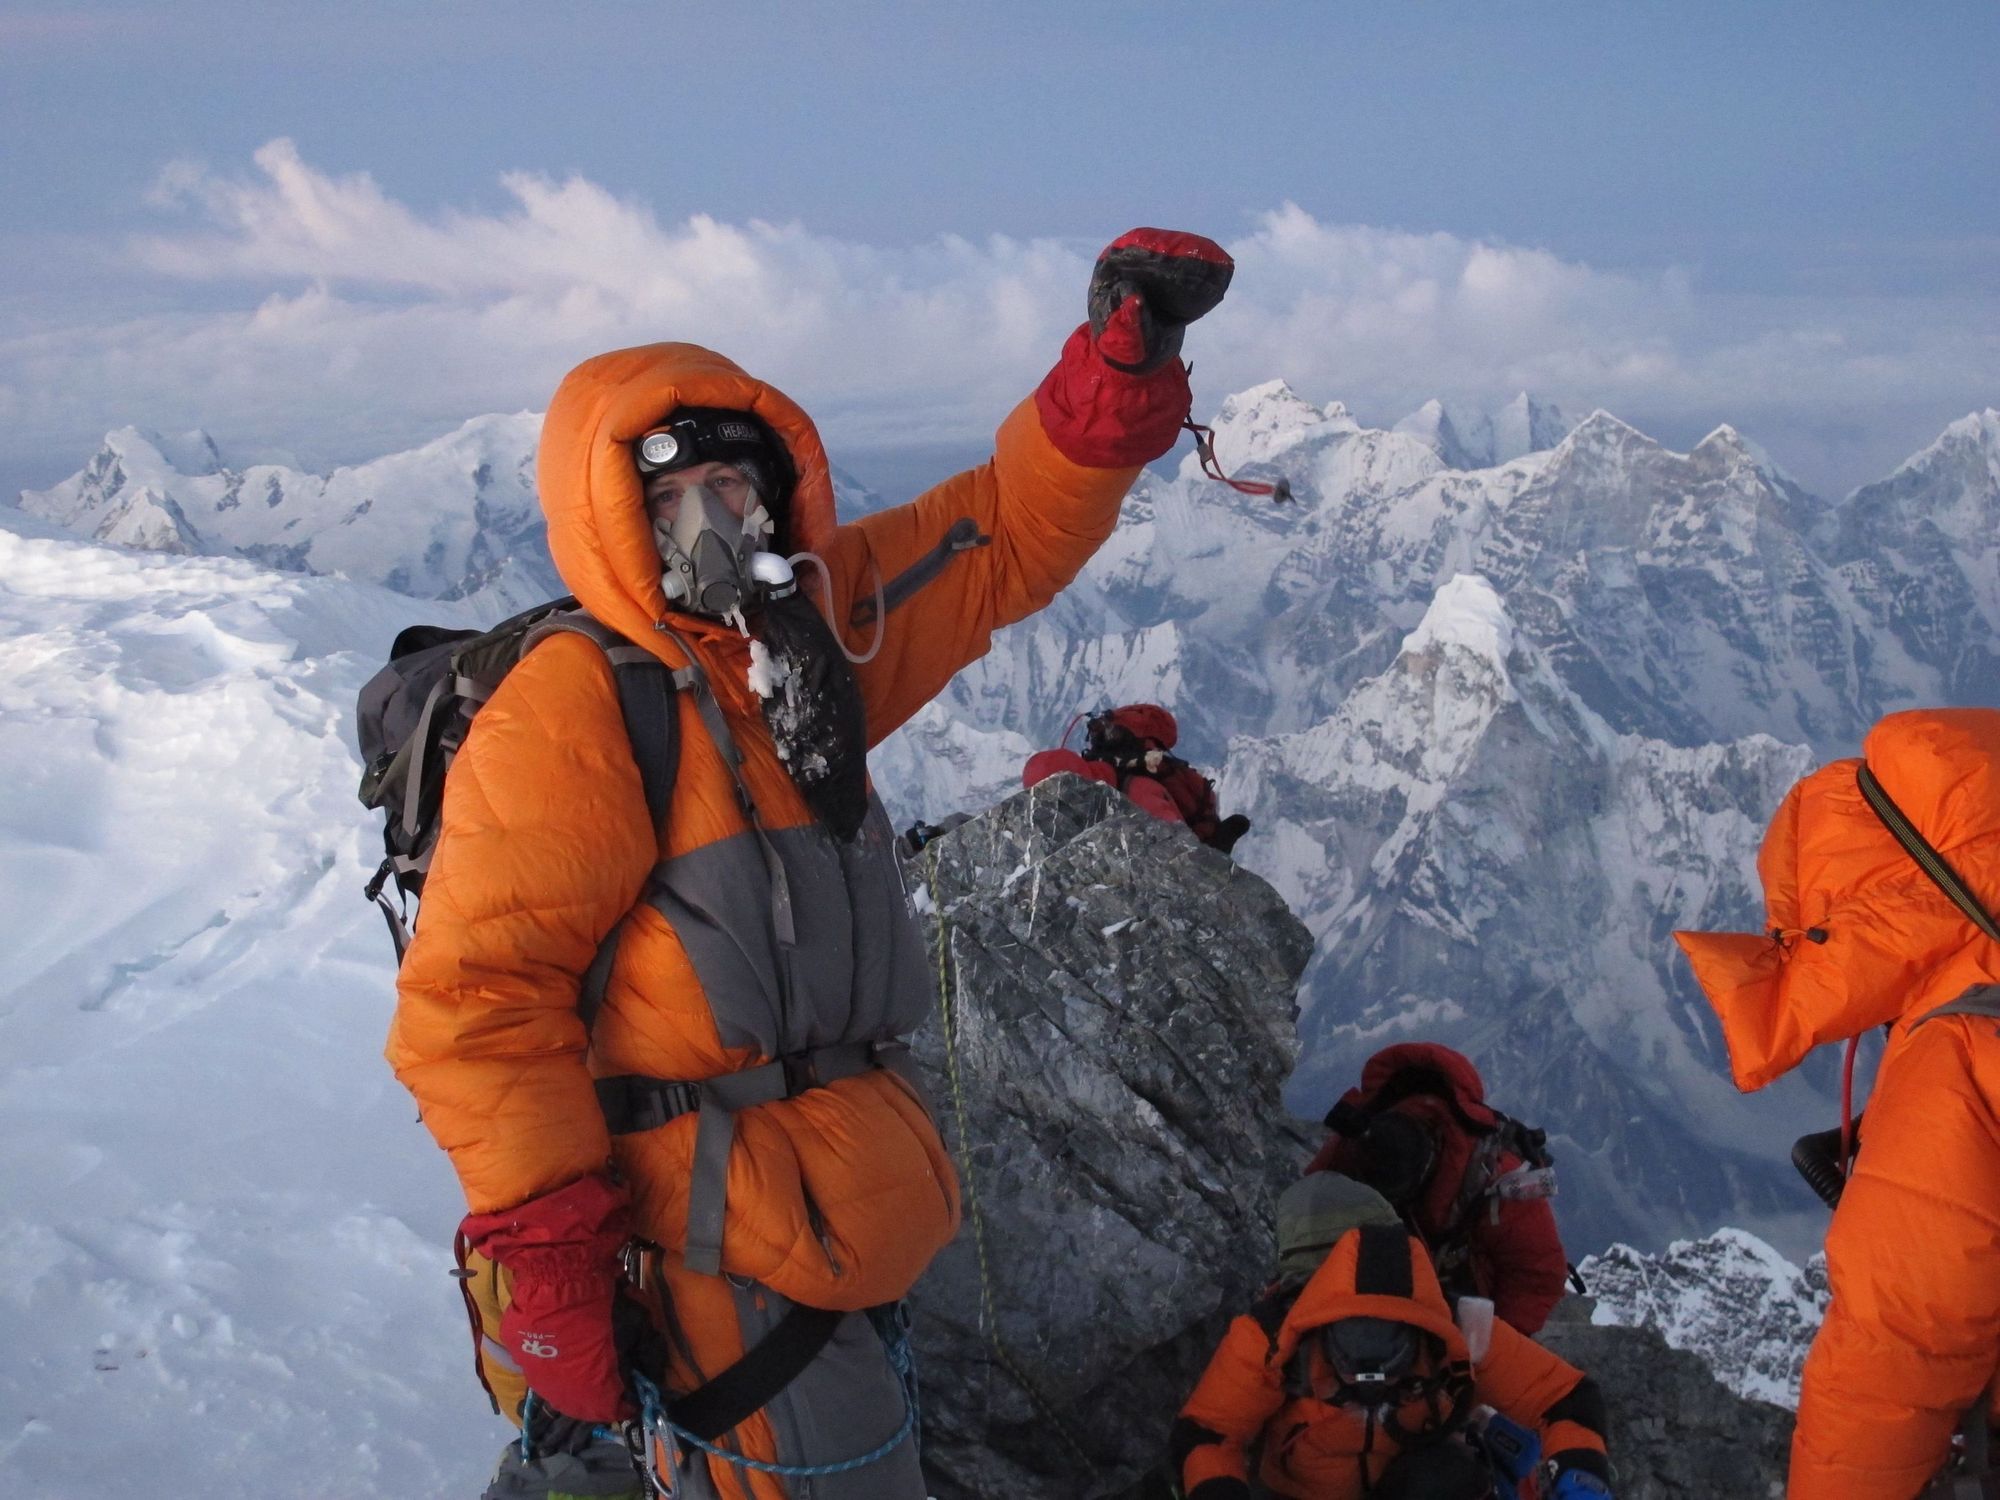 Jon Kedrowsk celebrating at the top of Mount Everest, May 2012